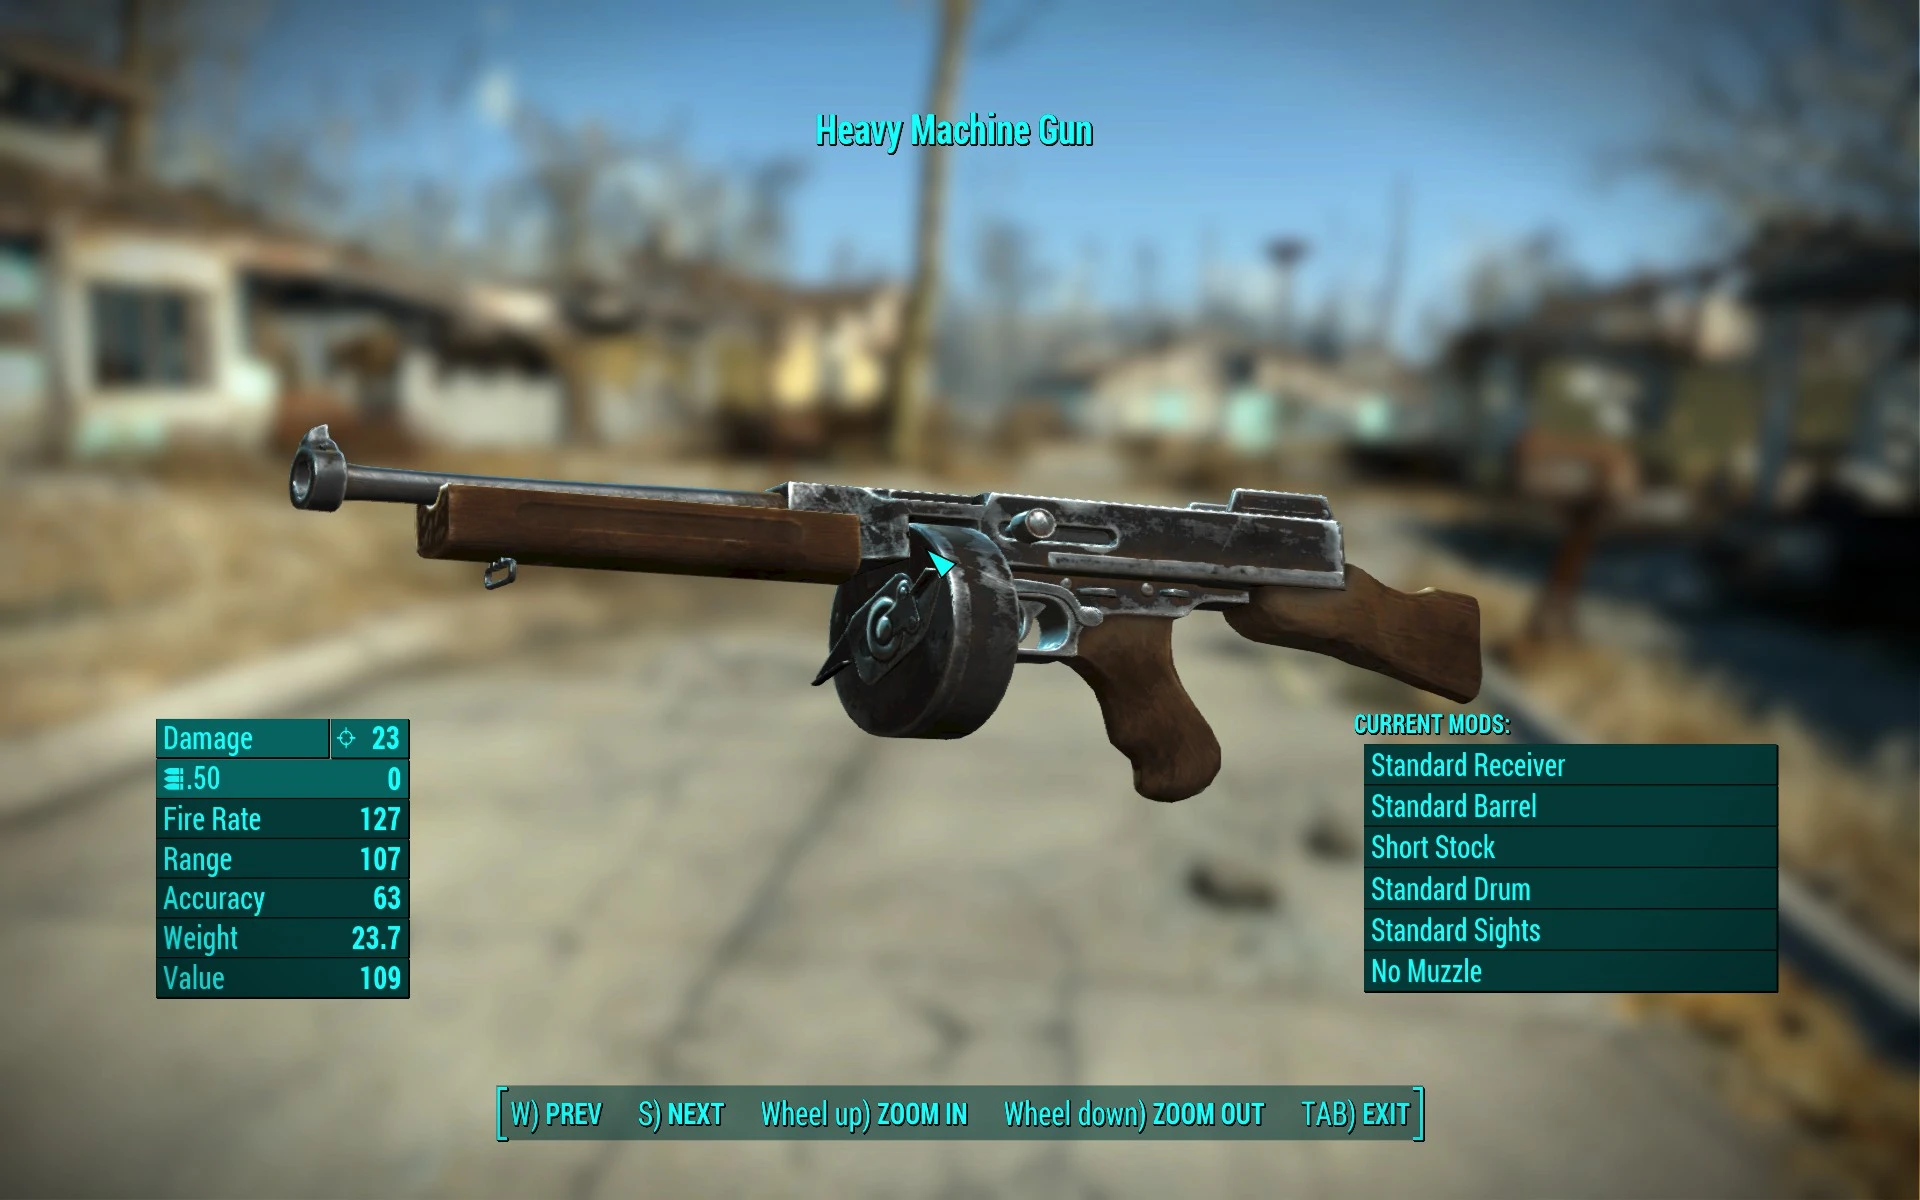 fallout 4 weapon animation mod